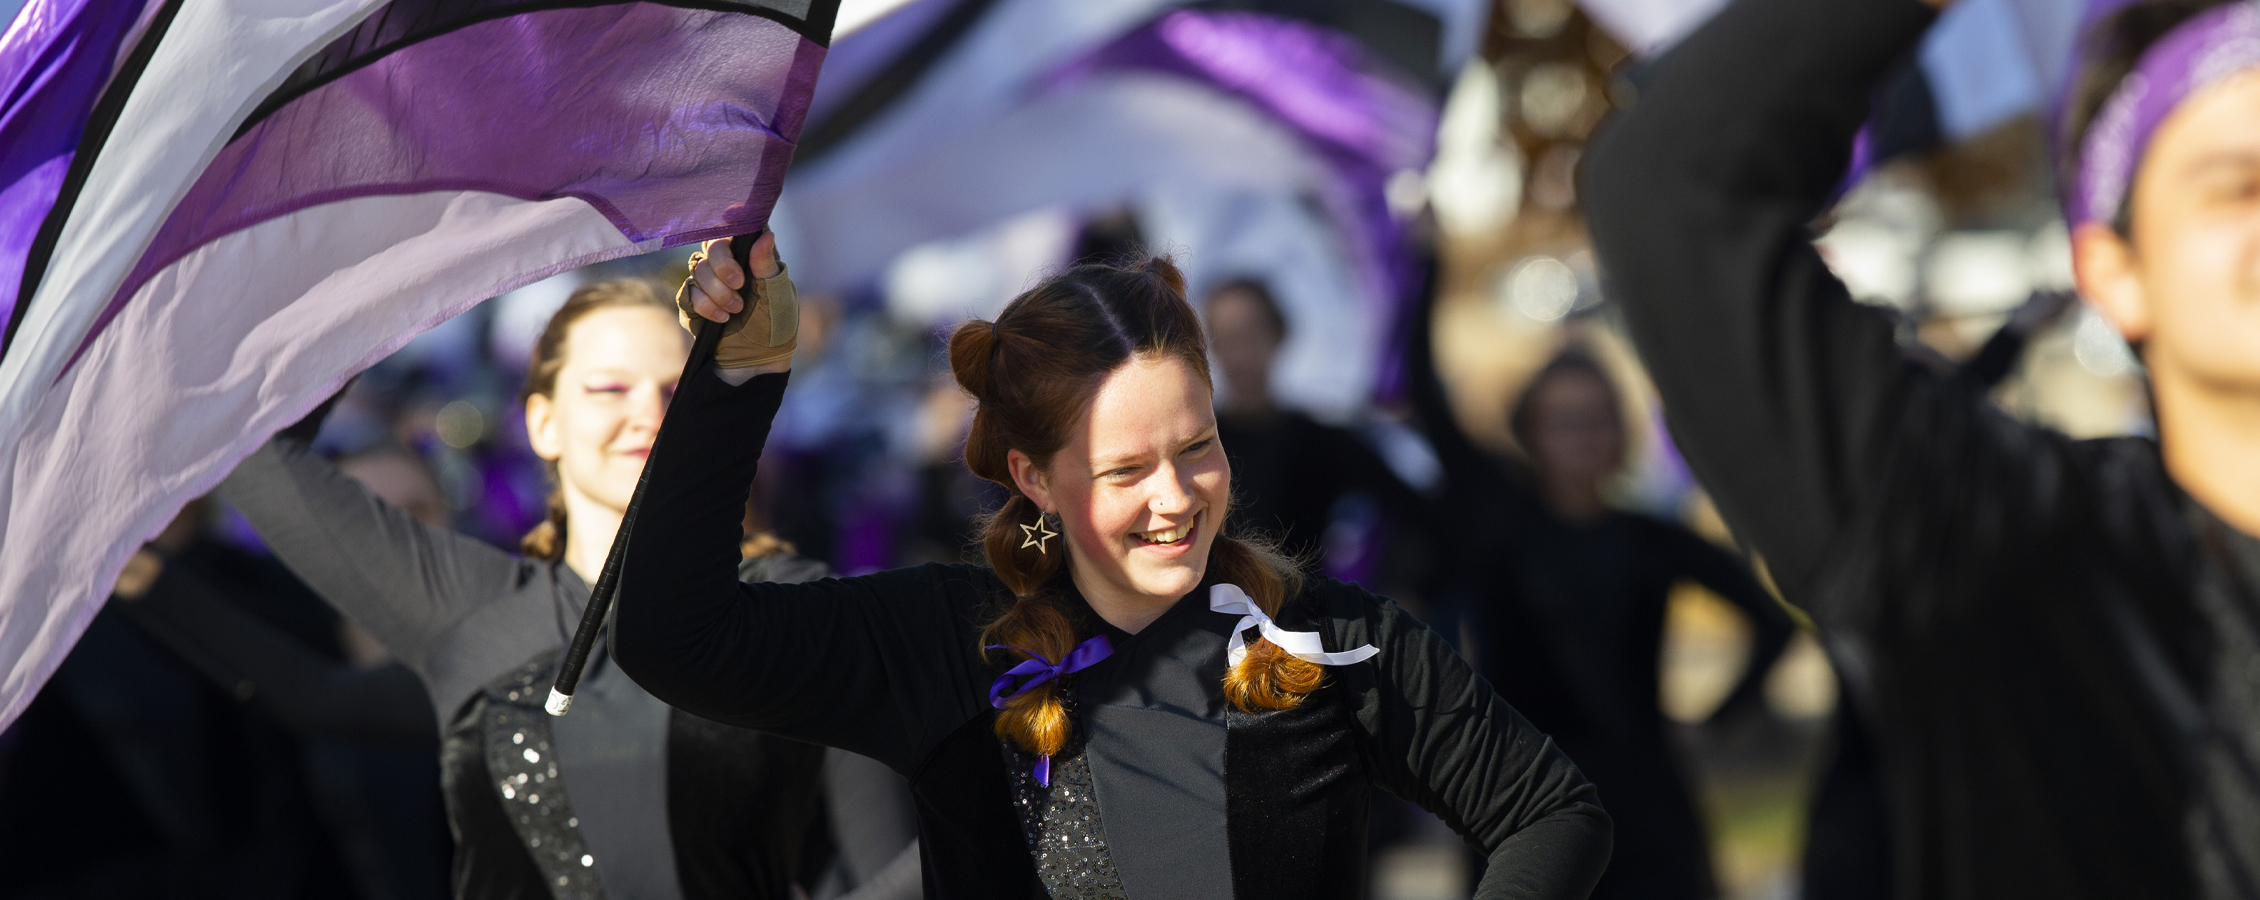 A member of the Color Guard smiles as she walks in the parade.